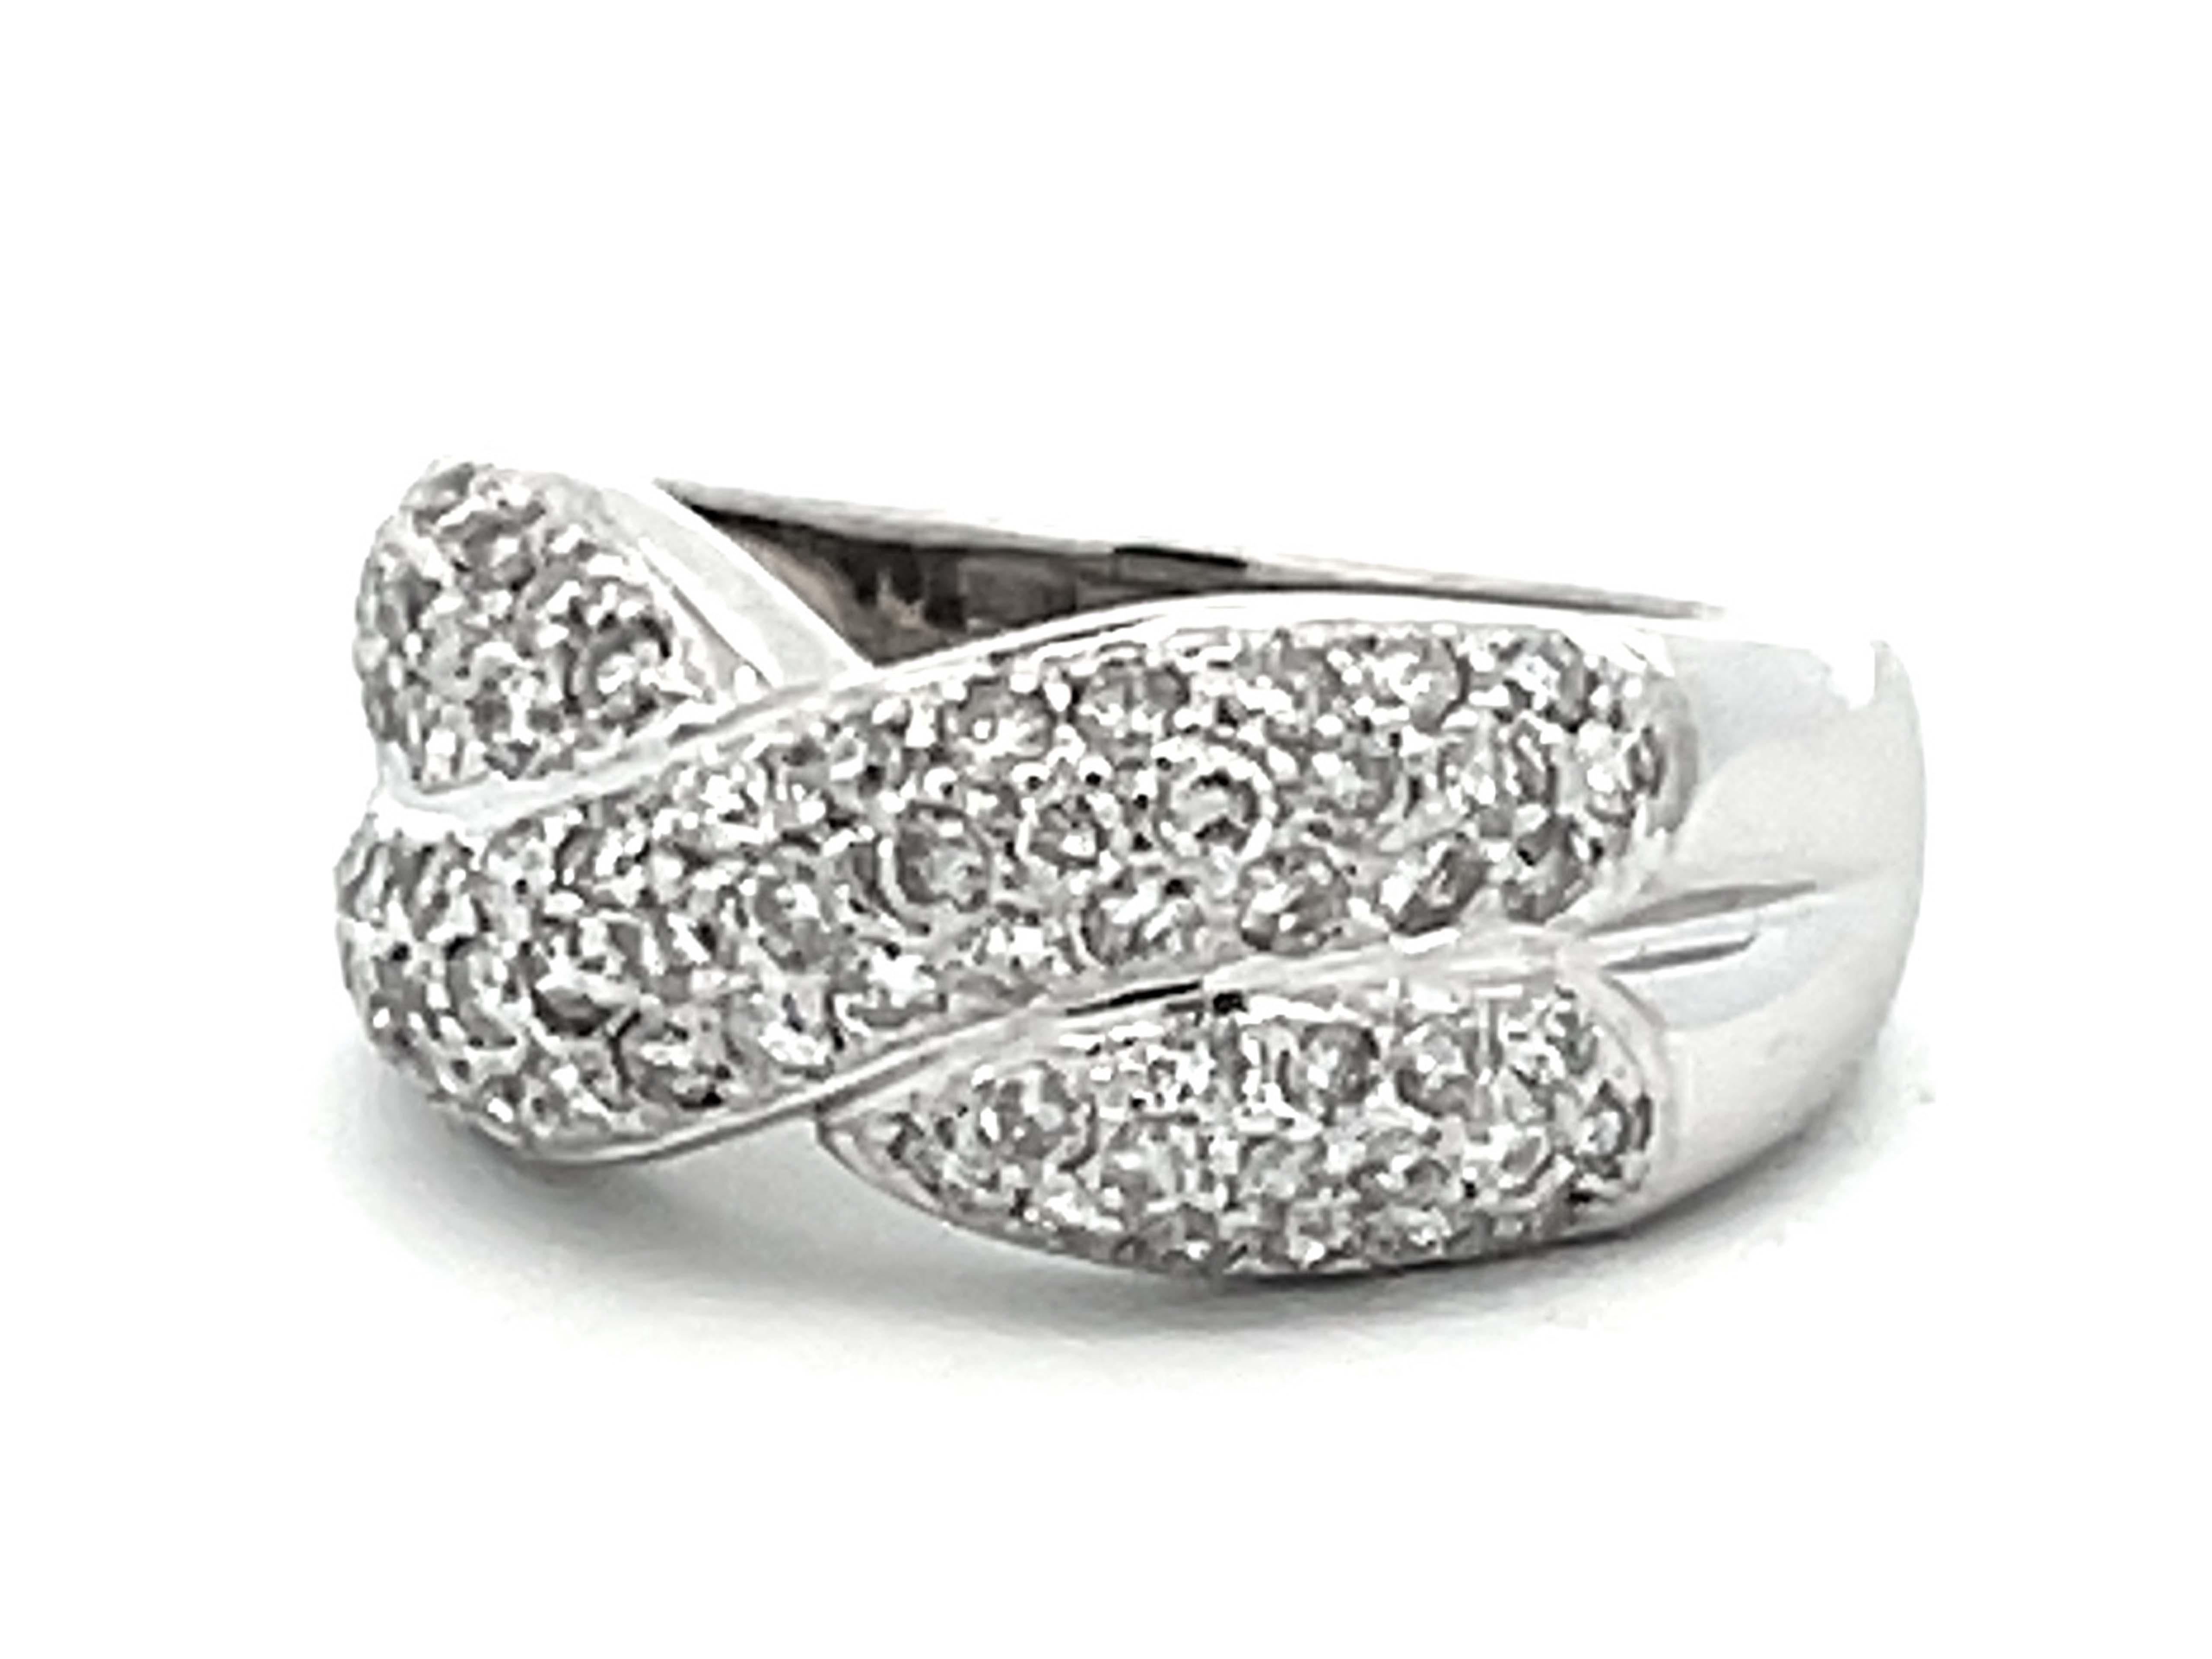 Criss Cross Diamond Pave Ring in 18k White Gold In Excellent Condition For Sale In Honolulu, HI